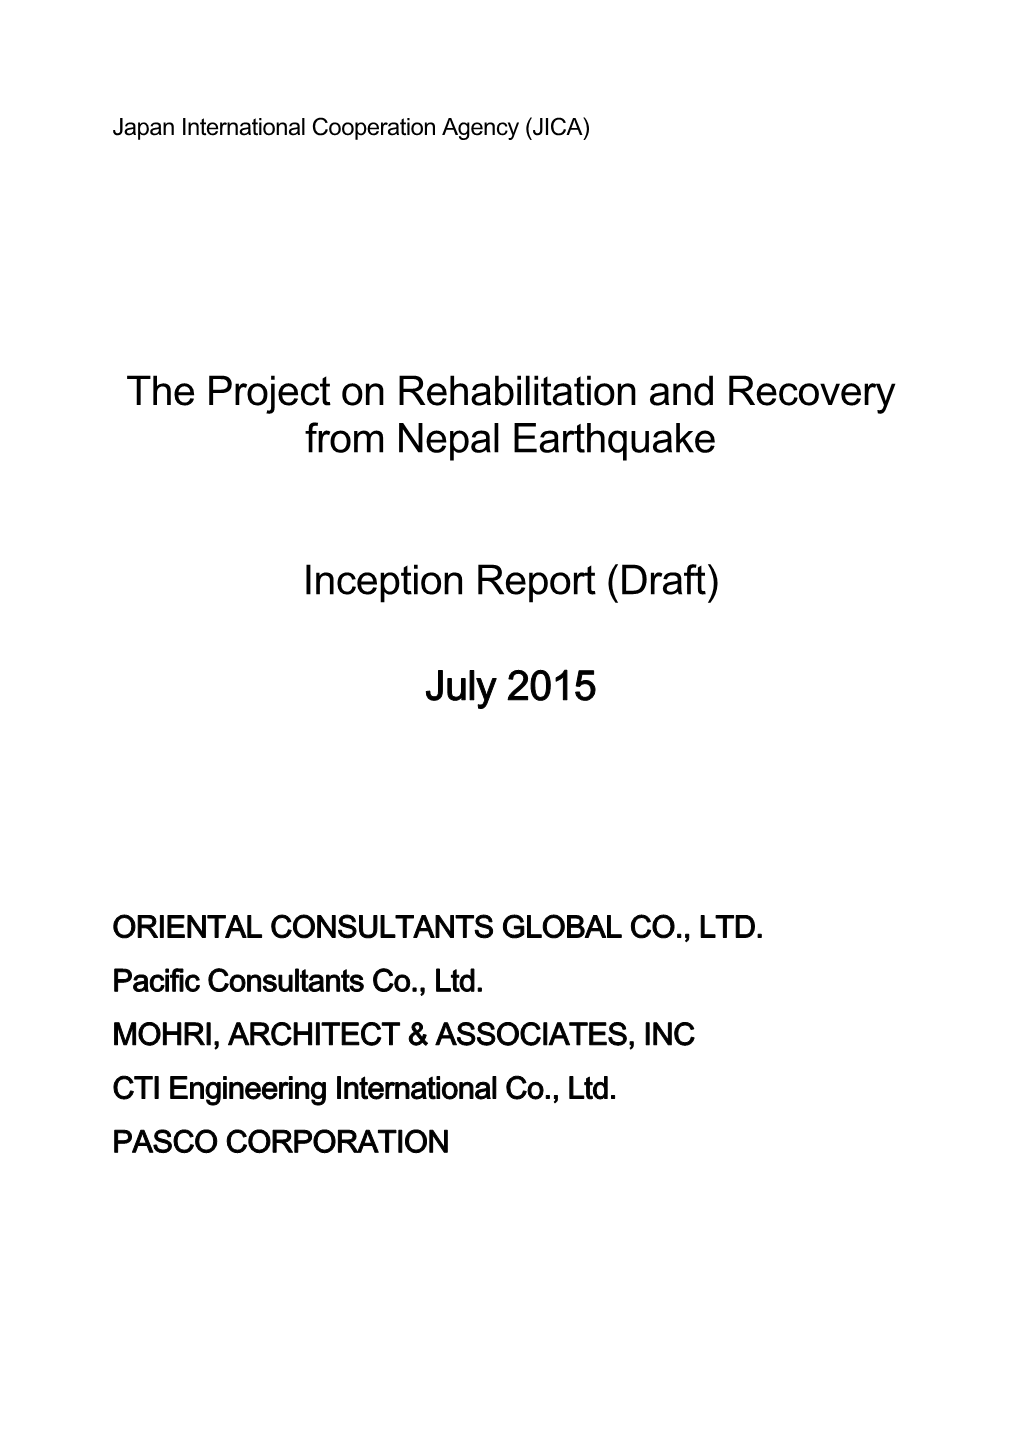 The Project on Rehabilitation and Recovery from Nepal Earthquake